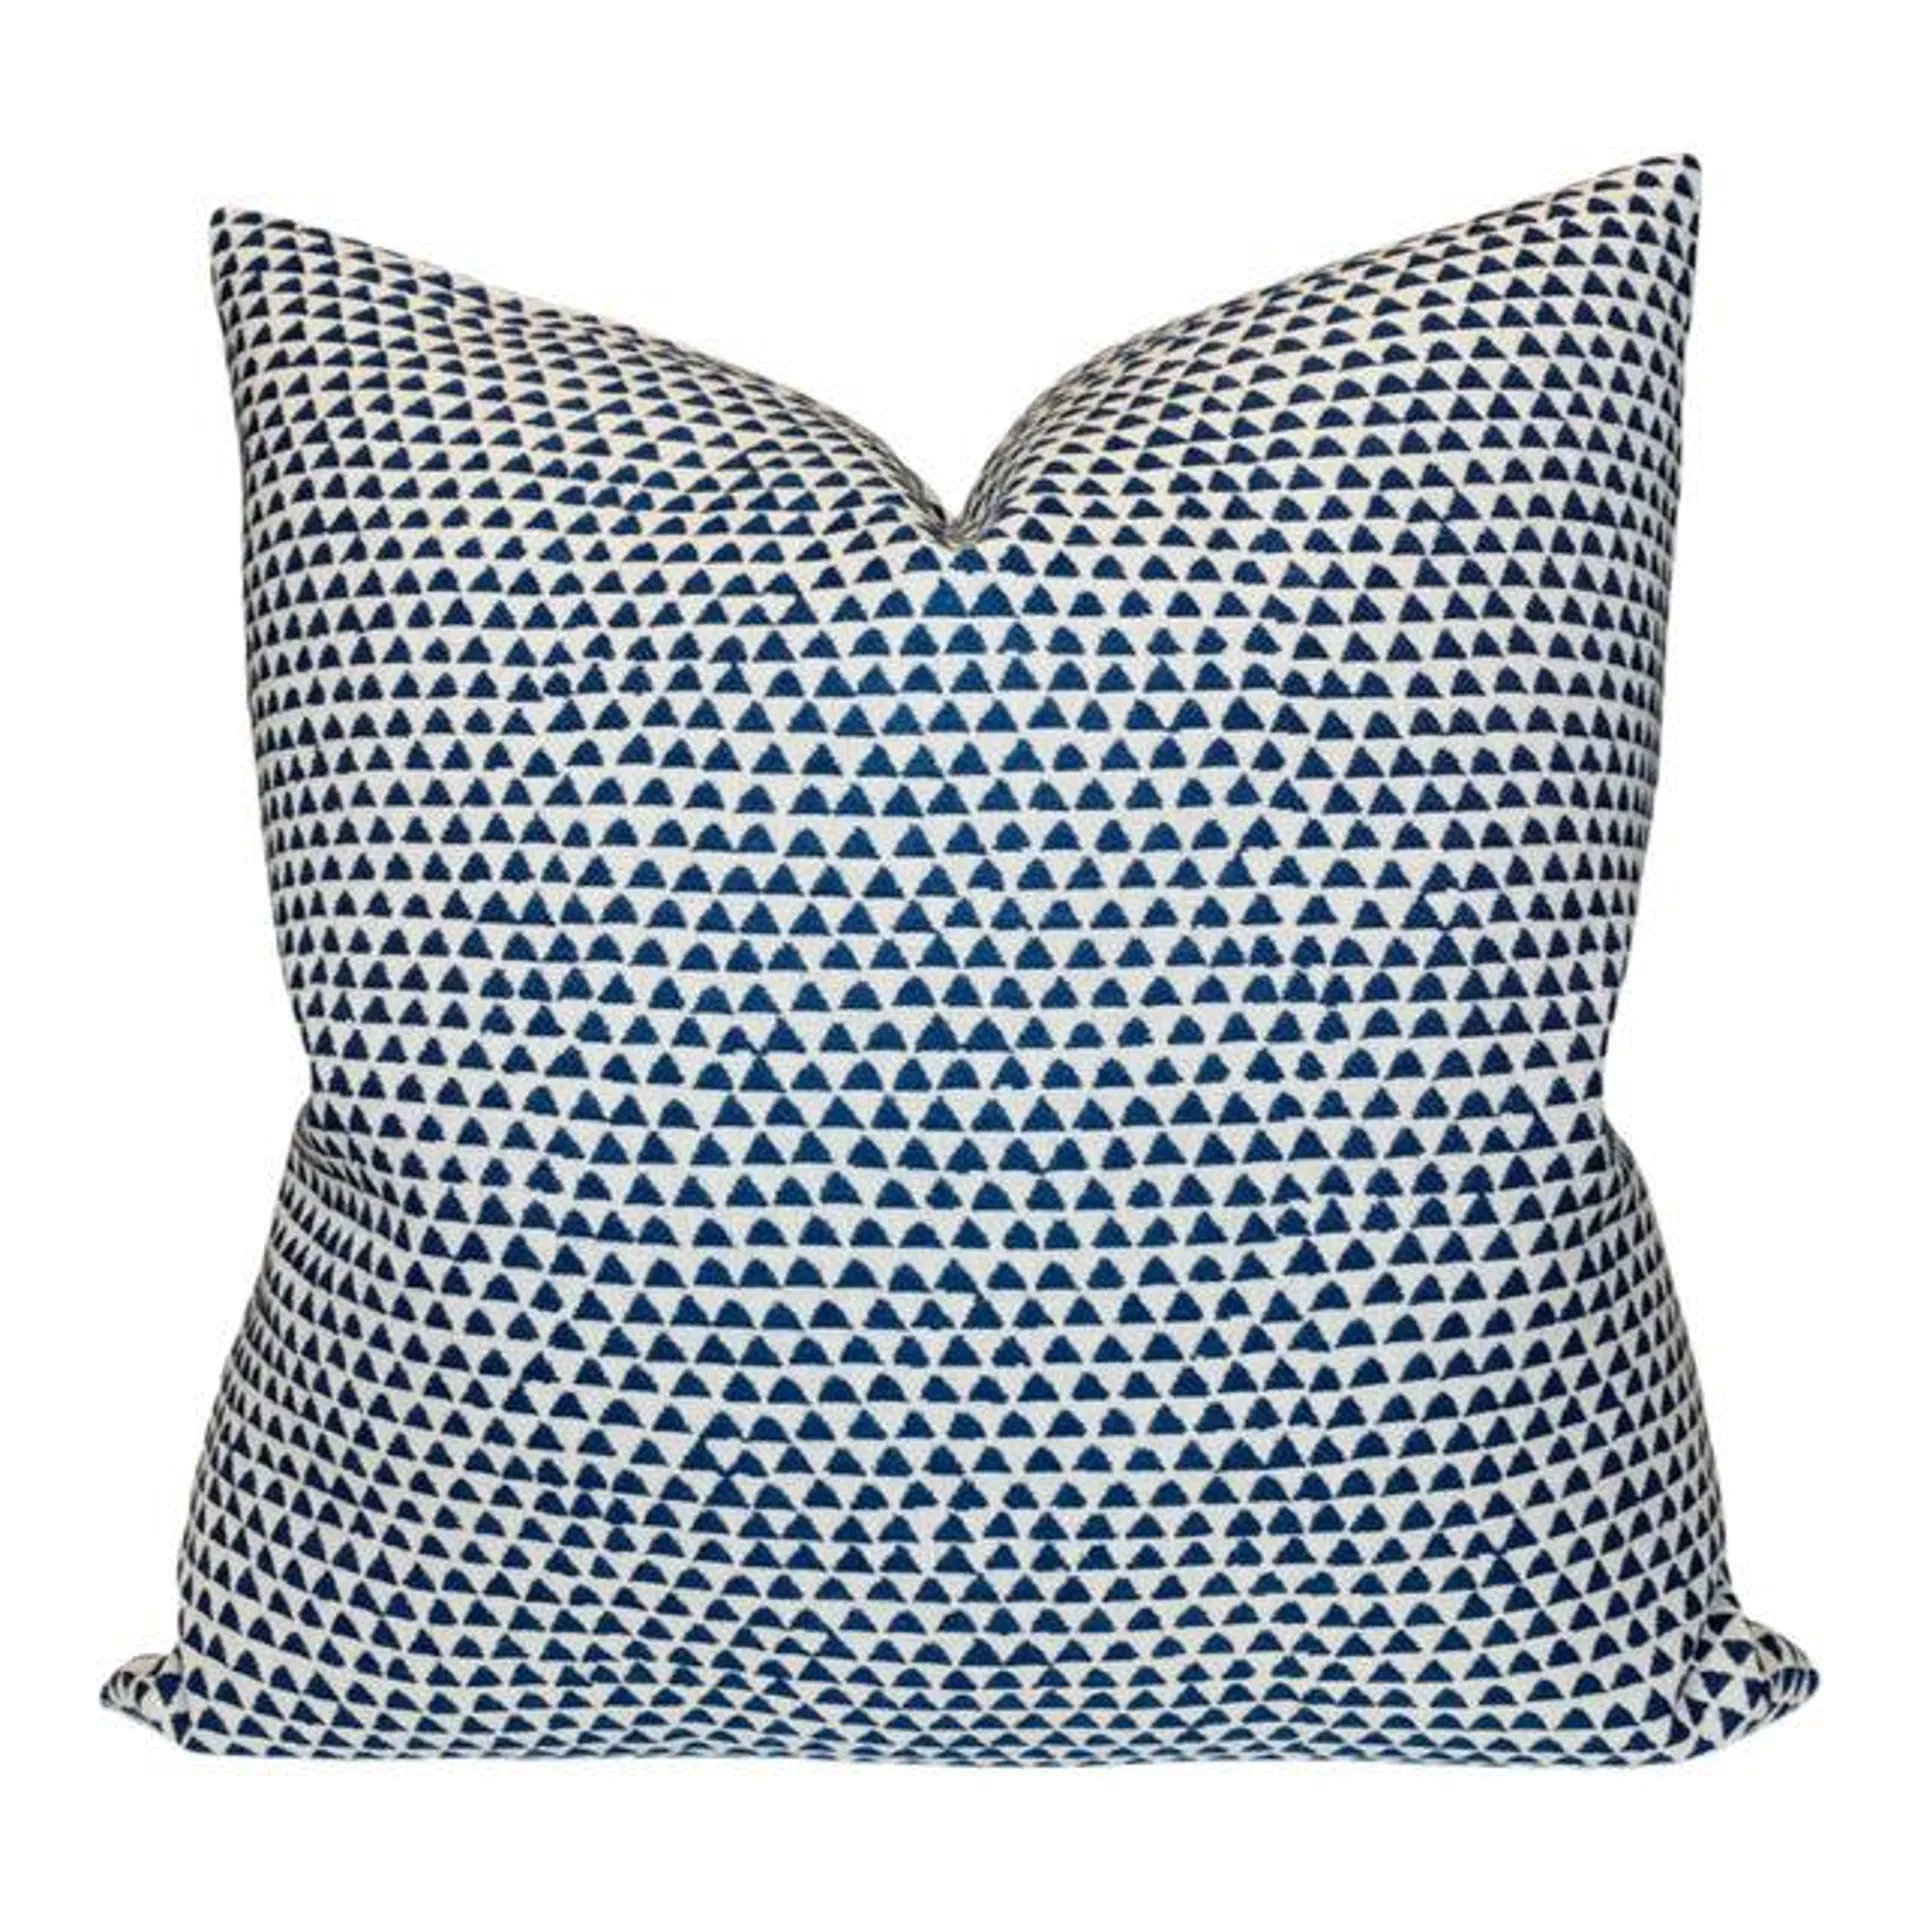 Huts Pillow Cover in Pacific Blue Indoor & Outdoor Pillow Cover